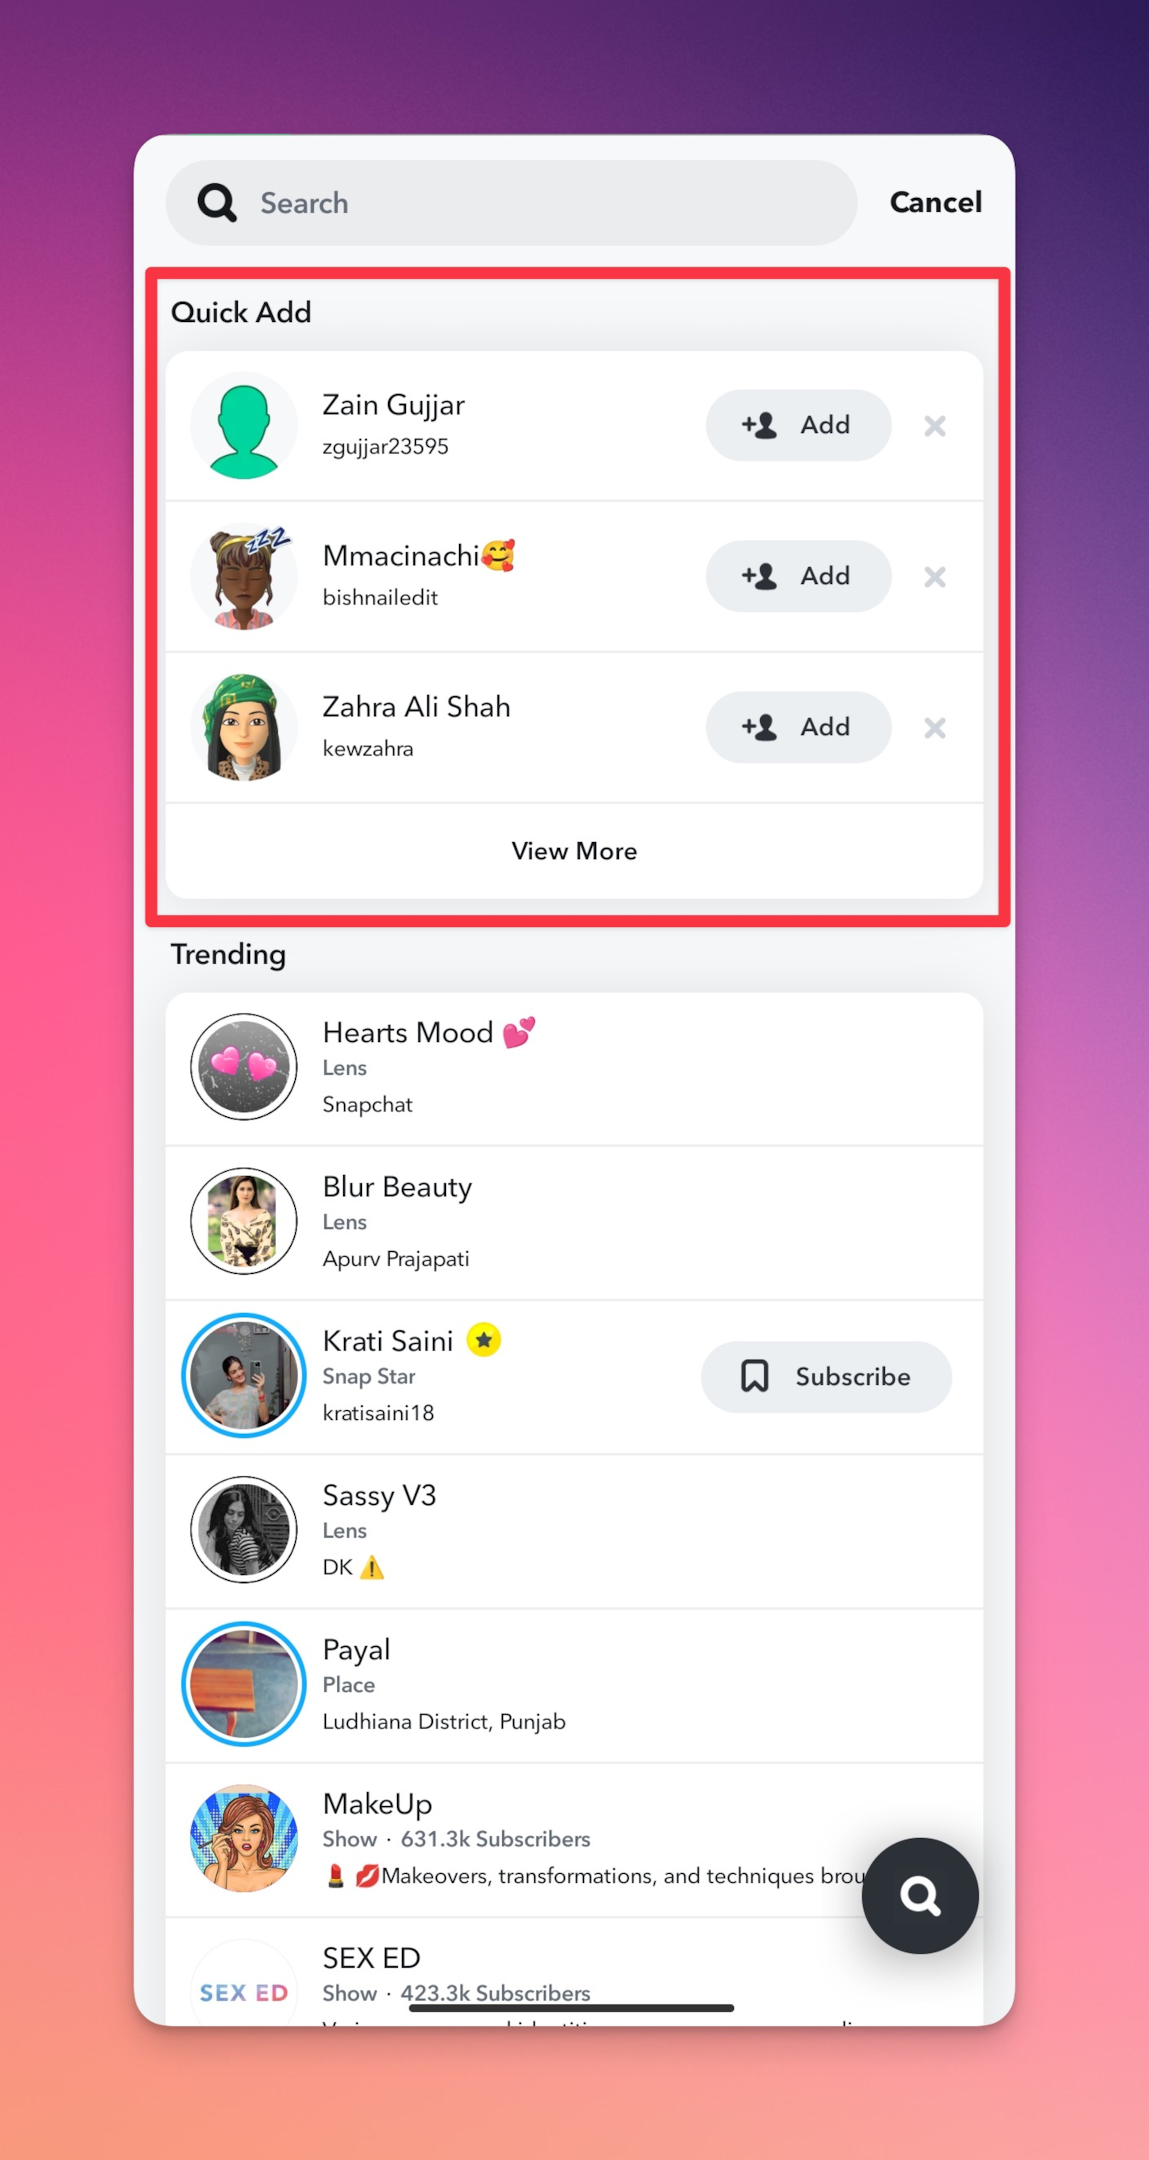 Remote.tools highlights the quick add section on Snapchat to add new friends from the list. This list contains Snapchat user who is living around you, share mutual friends, and other Snapchat users from your phone's contact list.